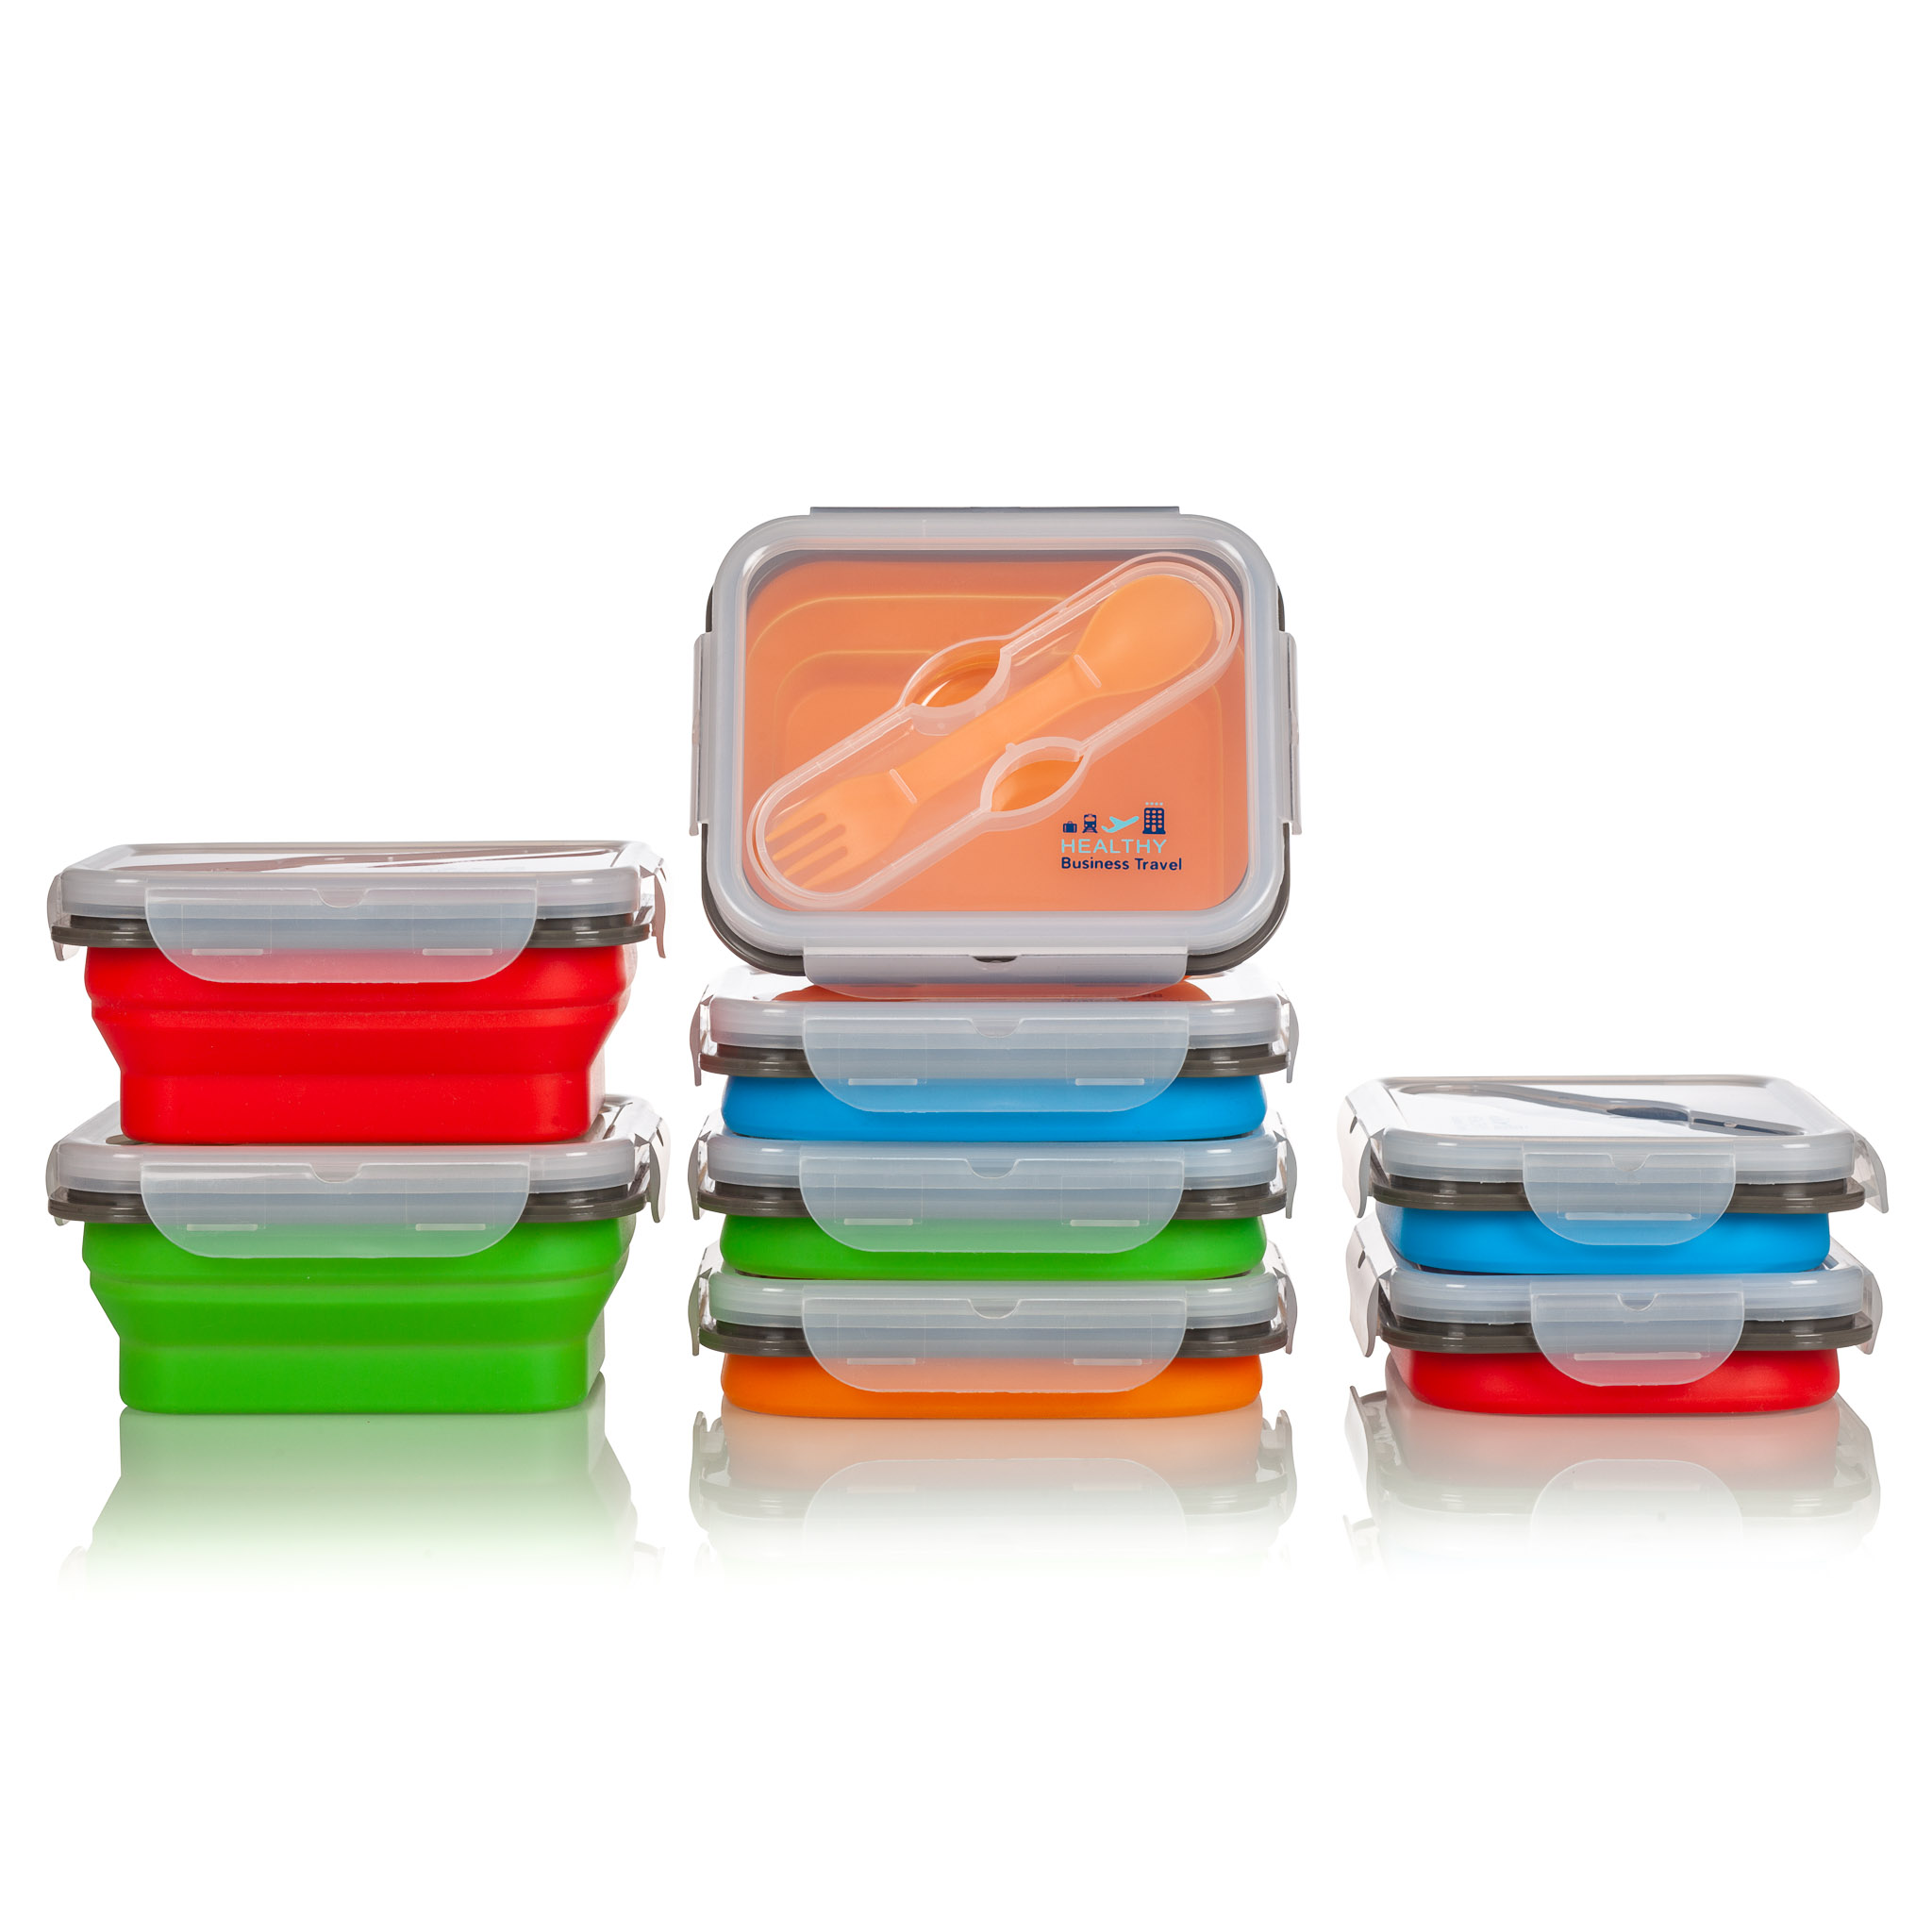 https://www.healthybusinesstravel.shop/wp-content/uploads/2021/01/HBT-1024-Edit-pack-of-containers-Web-Res.jpg